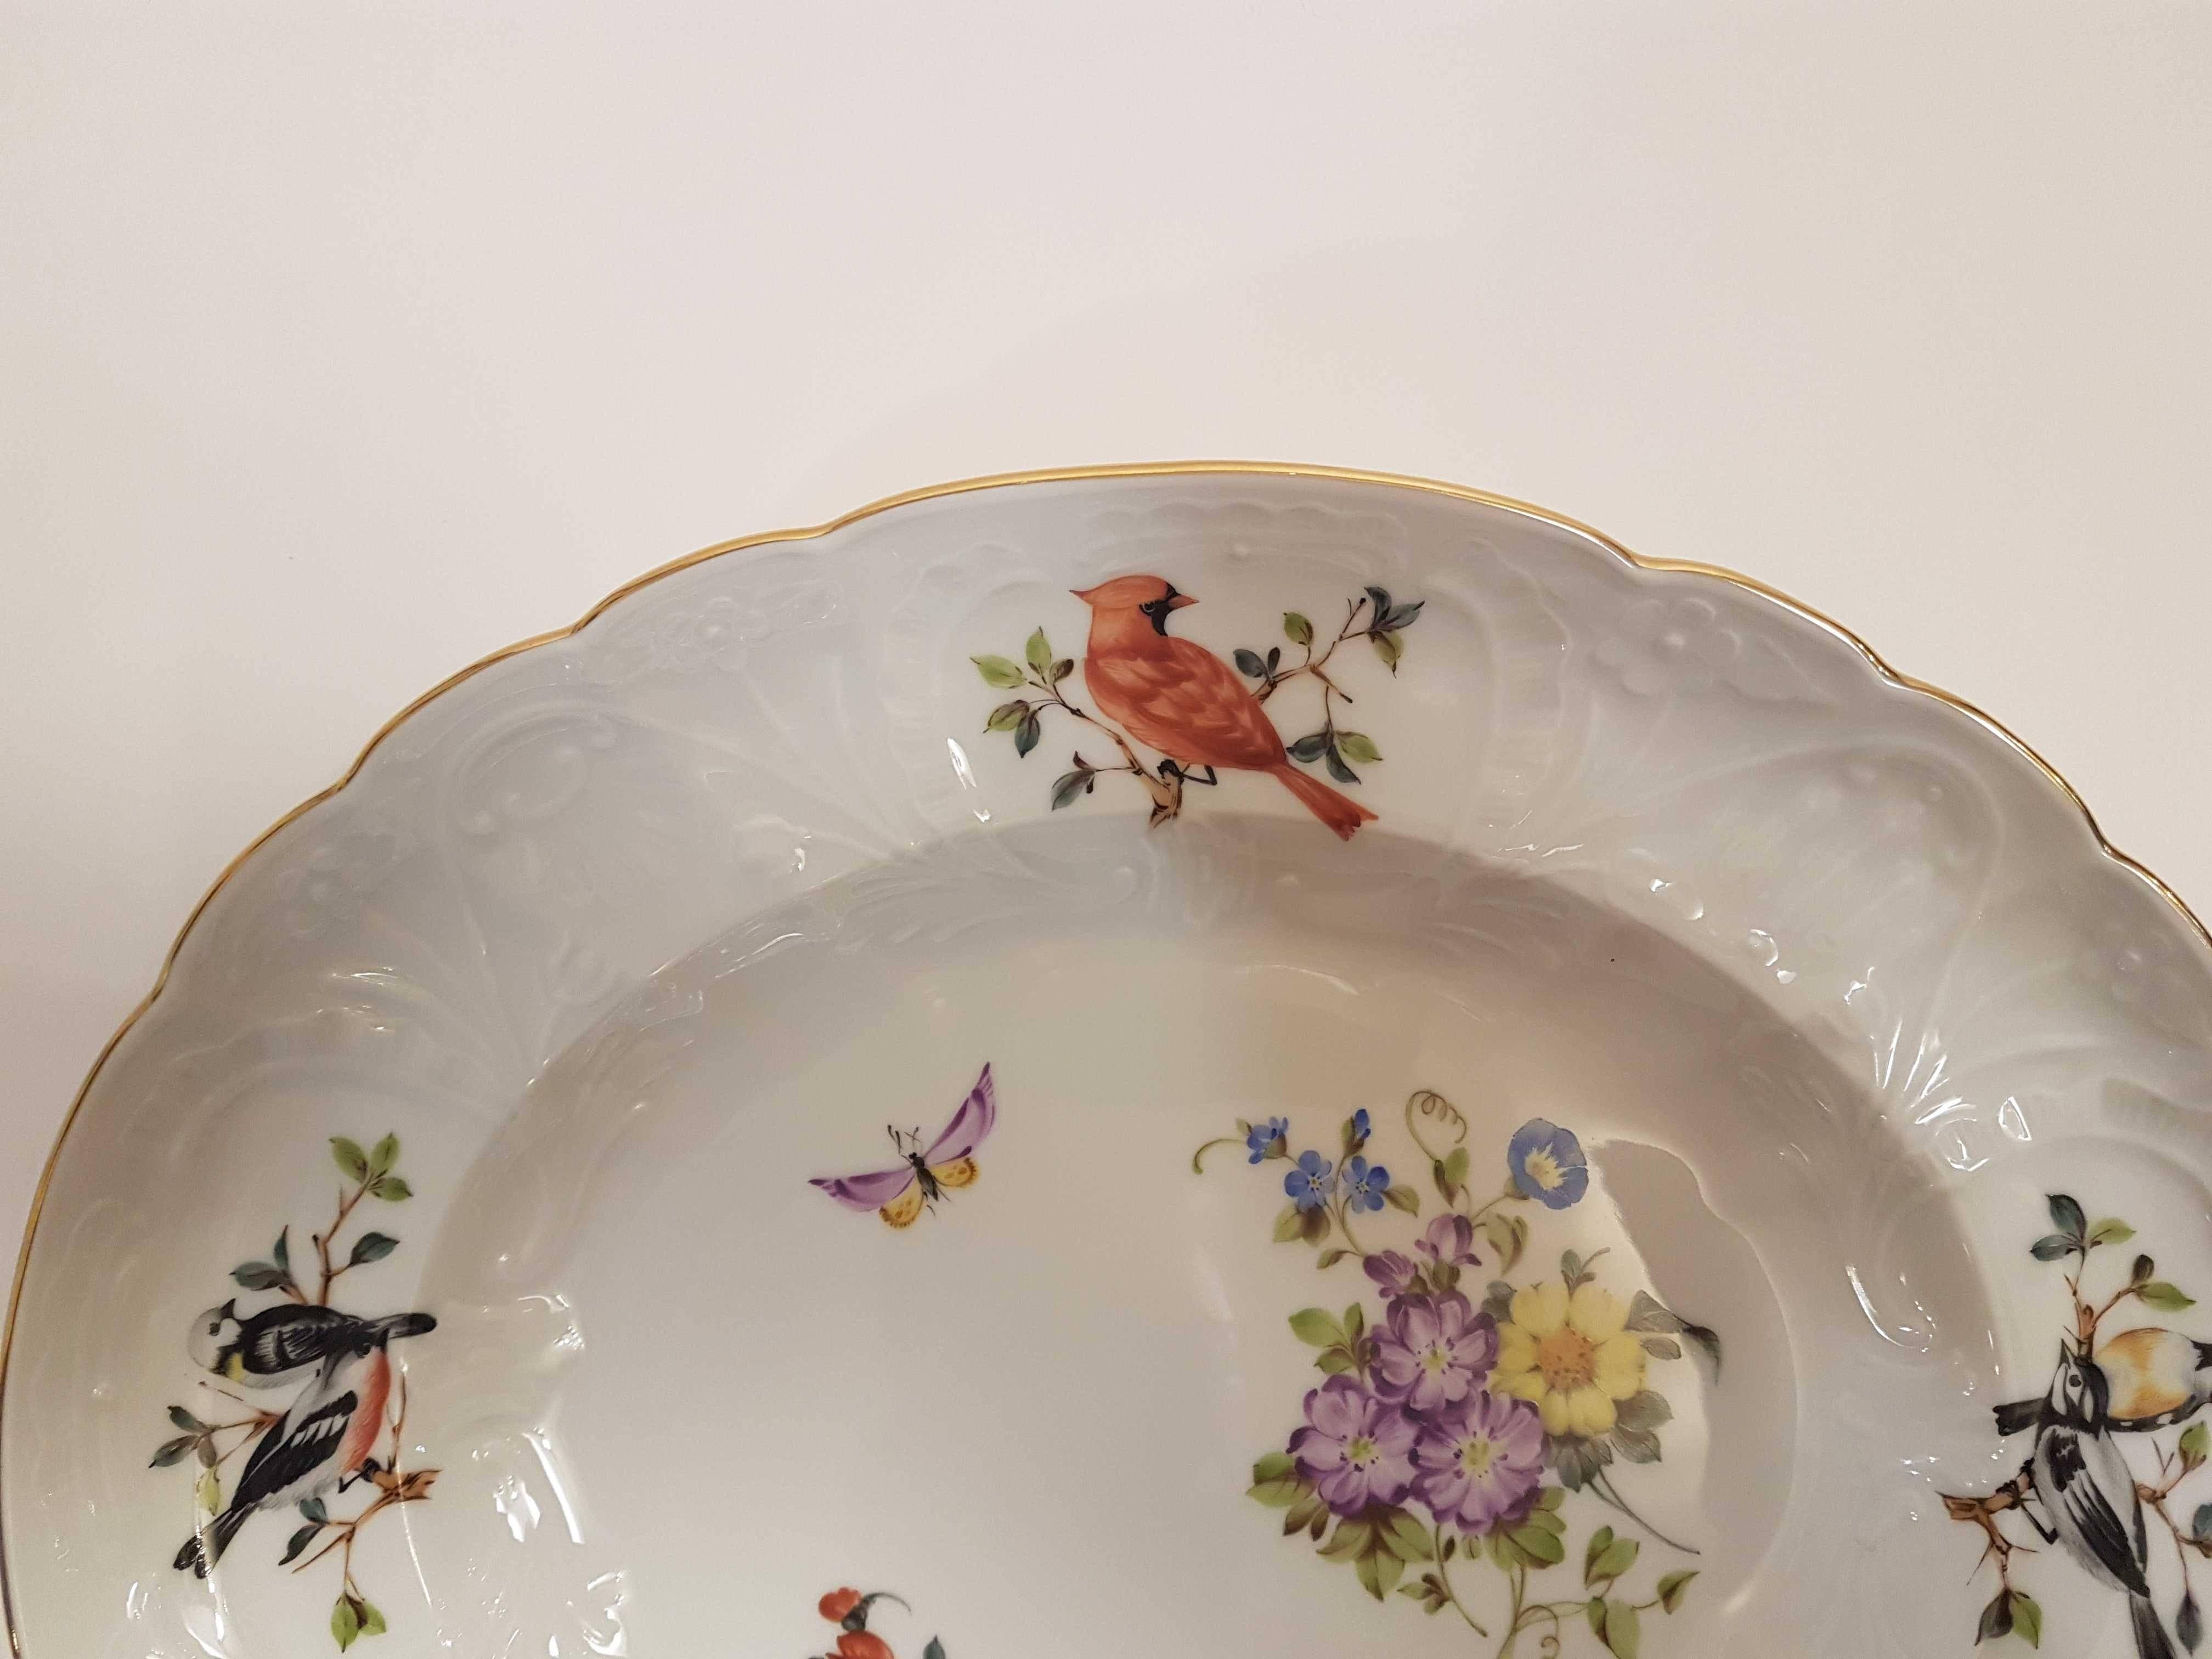 Beautiful dish in Rococo style.
Hand painted porcelain with motifs of flowers and birds.
Marked and signed by the master decorator.
Modern.

The factory of Herend is, since 1826, one of the most famous centers of hand-painted porcelain.